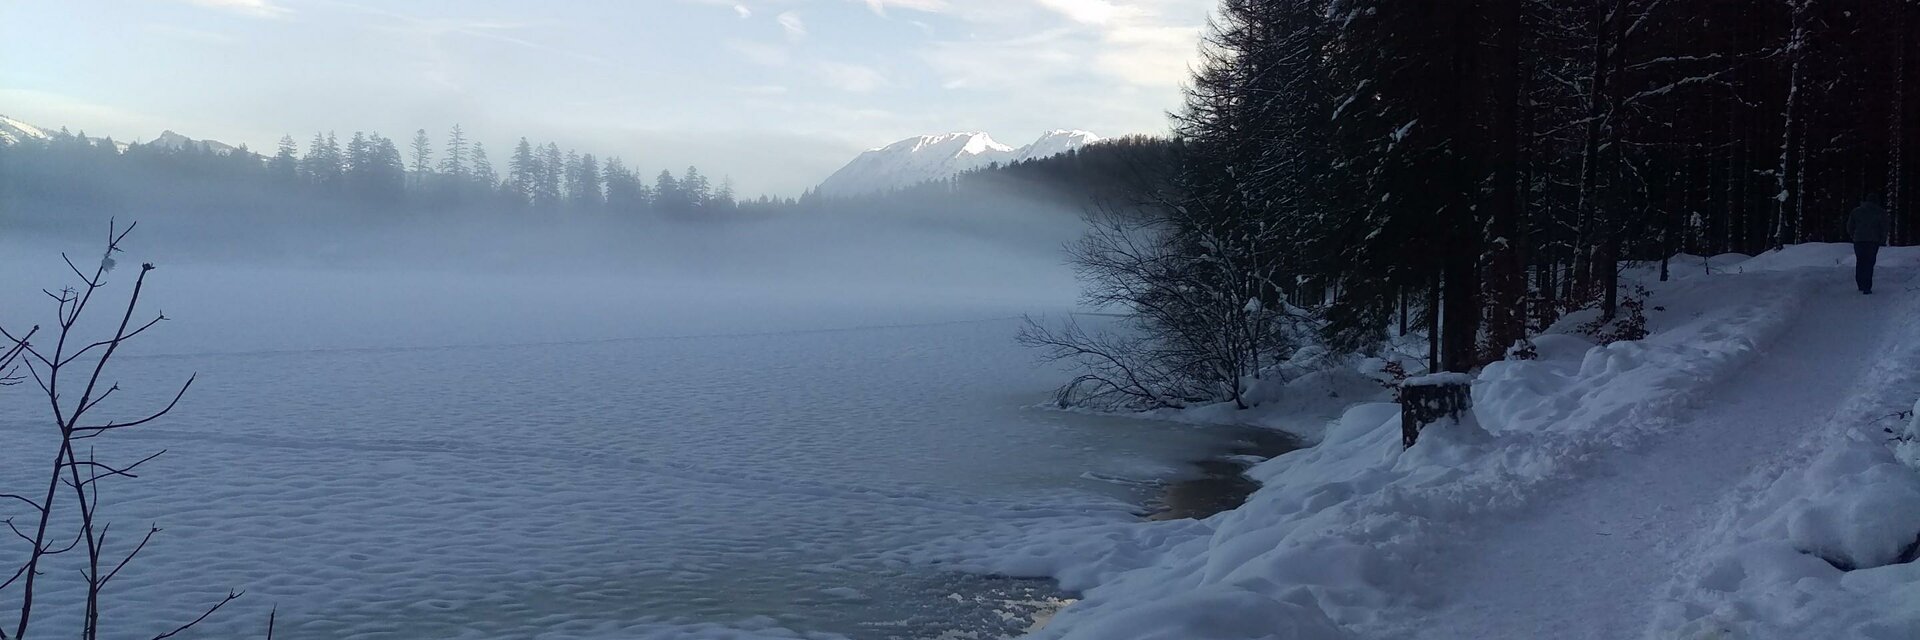 Mystical & enchanting: winter hikes in Ausseerland - Impression #1